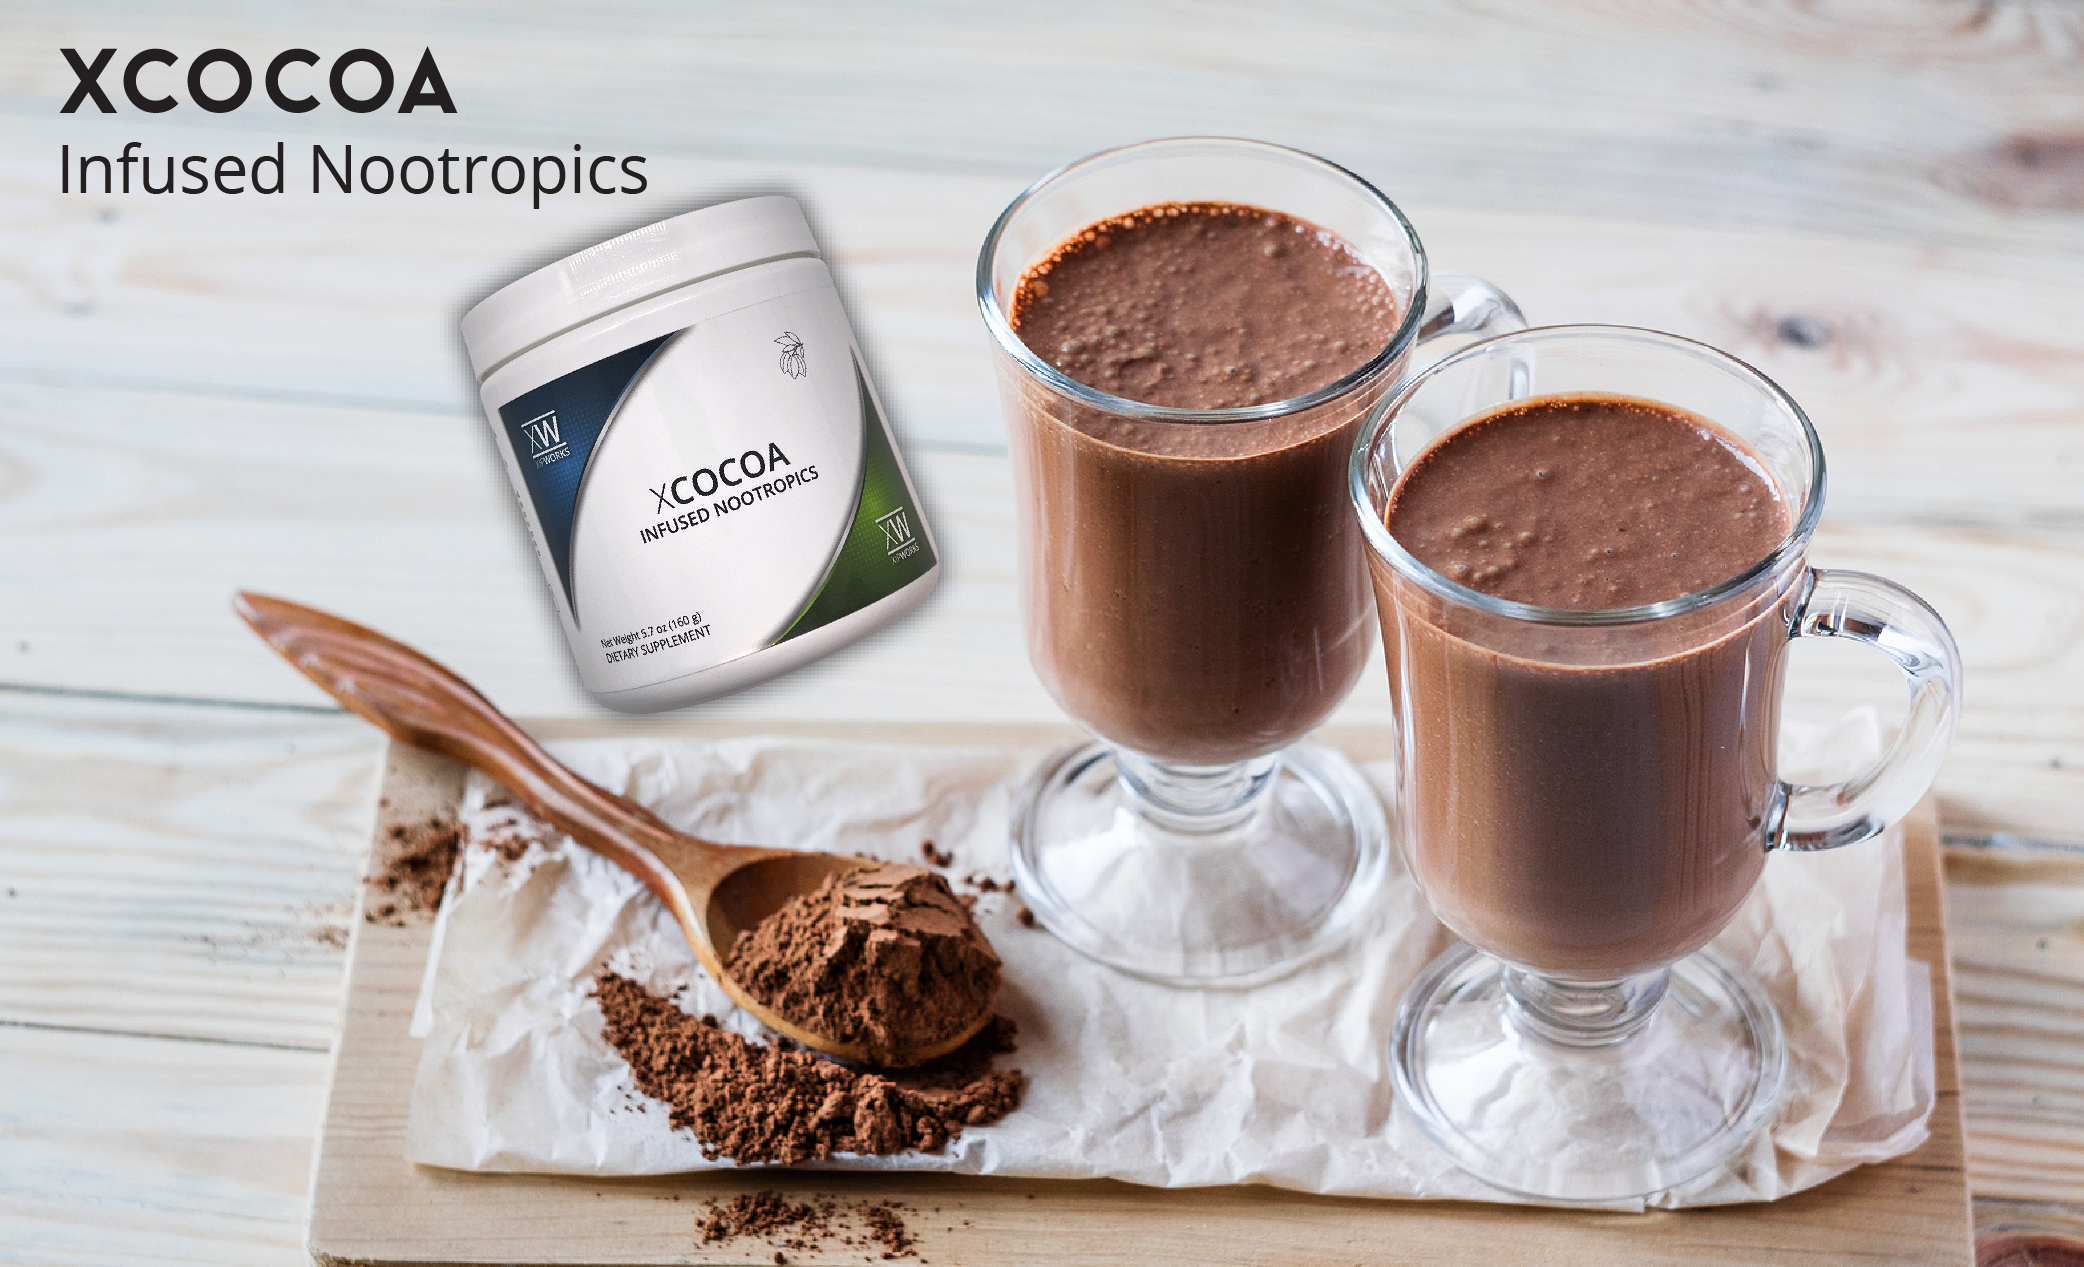 Discover The Rich Chocolate Taste of XCocoa